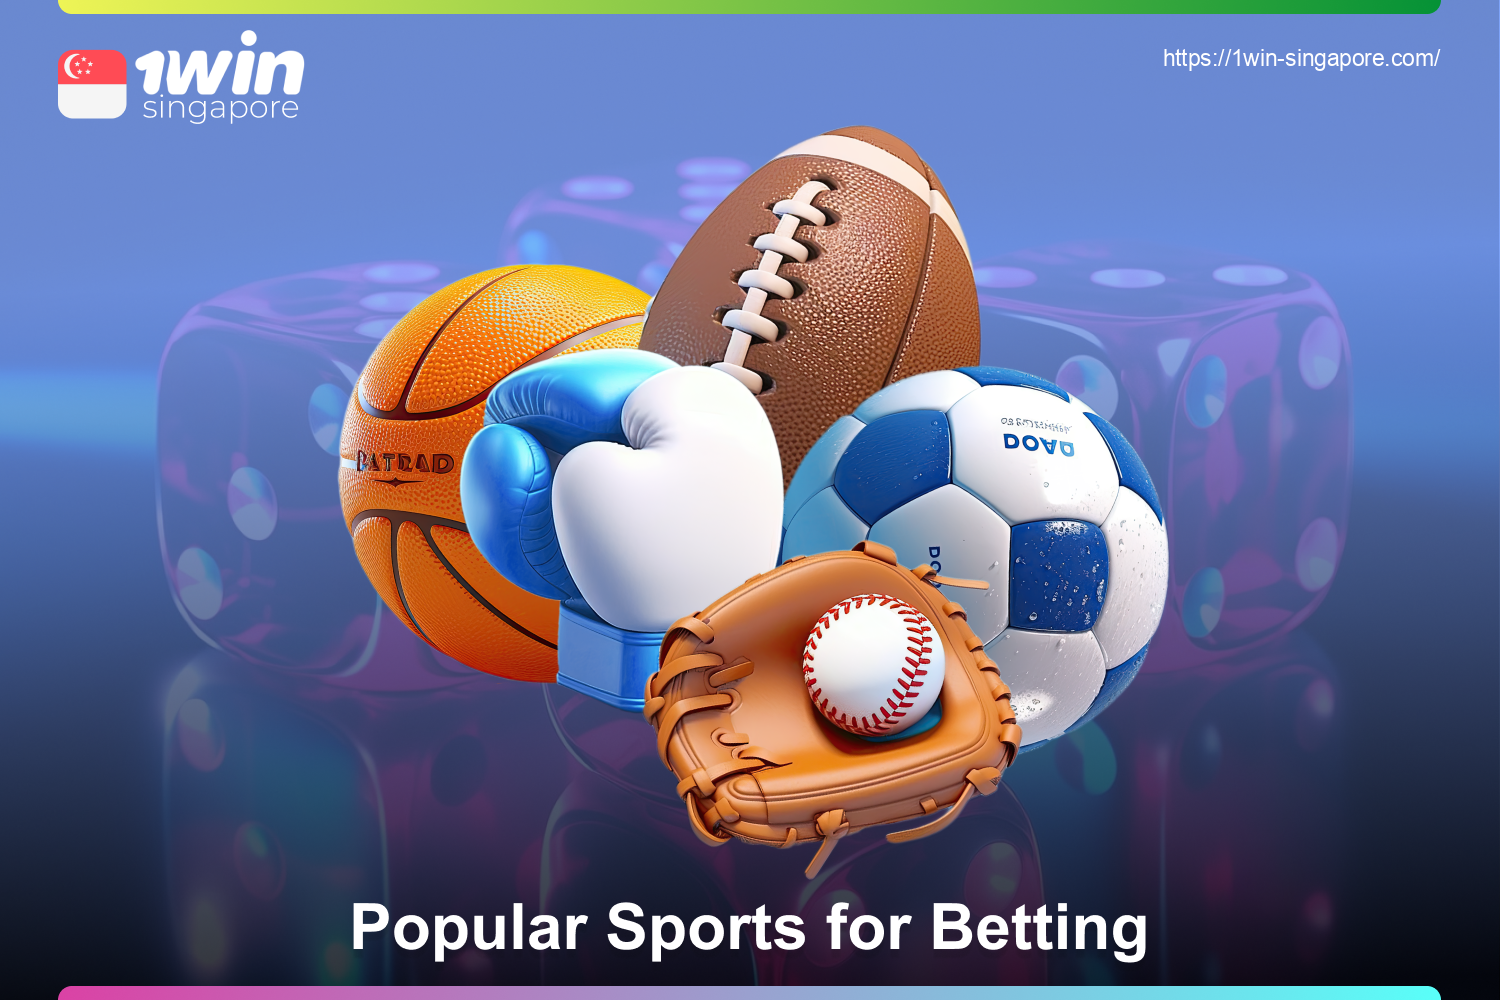 At 1win, Singaporeans can bet on all famous sports, so thousands of matches are available to them every day